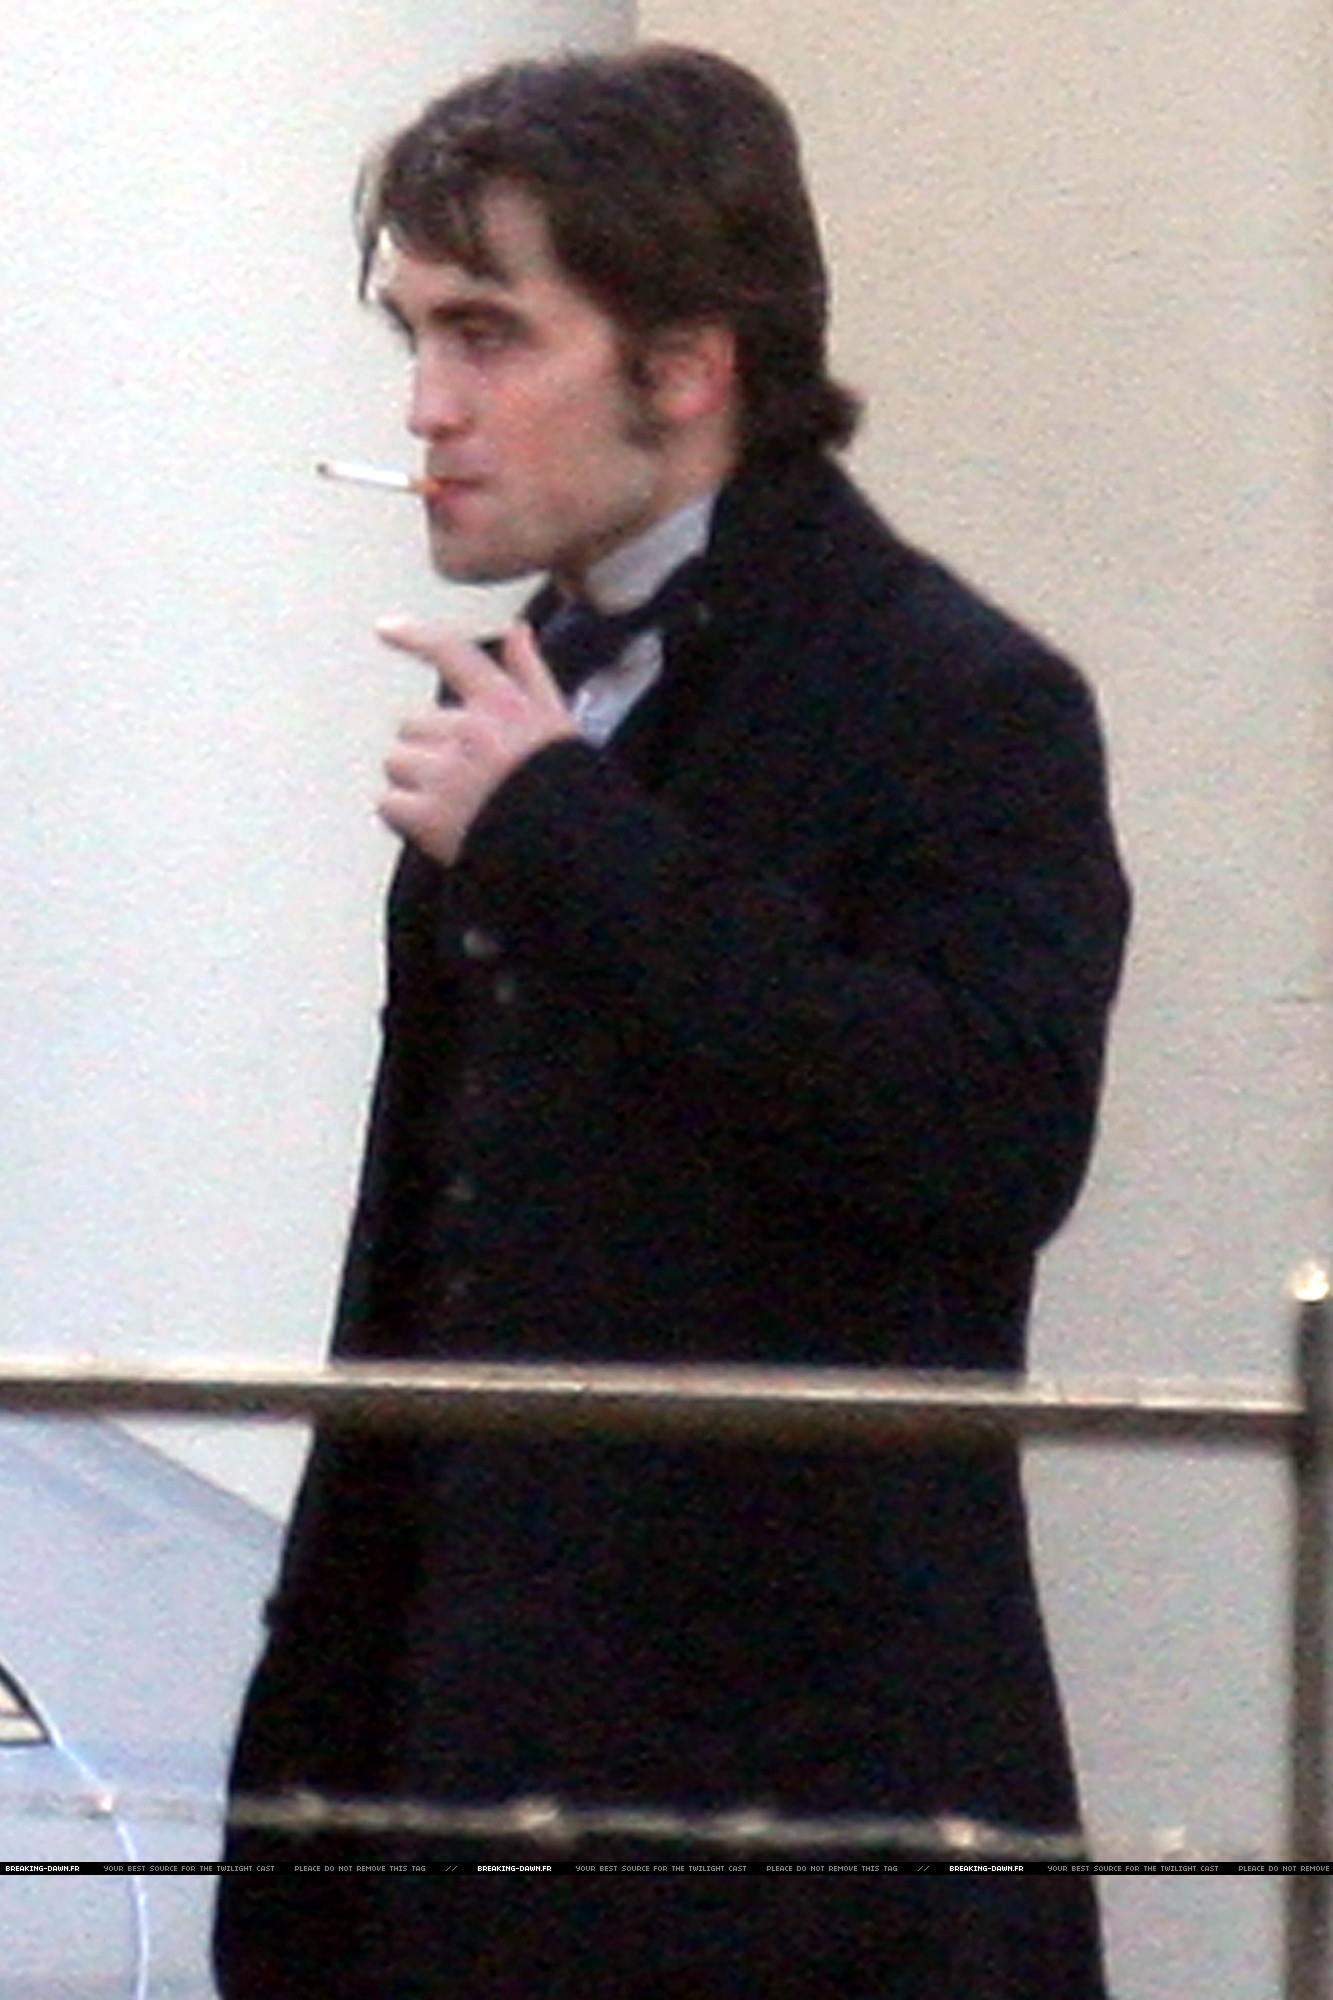 First Pics from Bel Ami Set: Robert Pattinson is Georges Duroy | BelAmiFilm.com ...